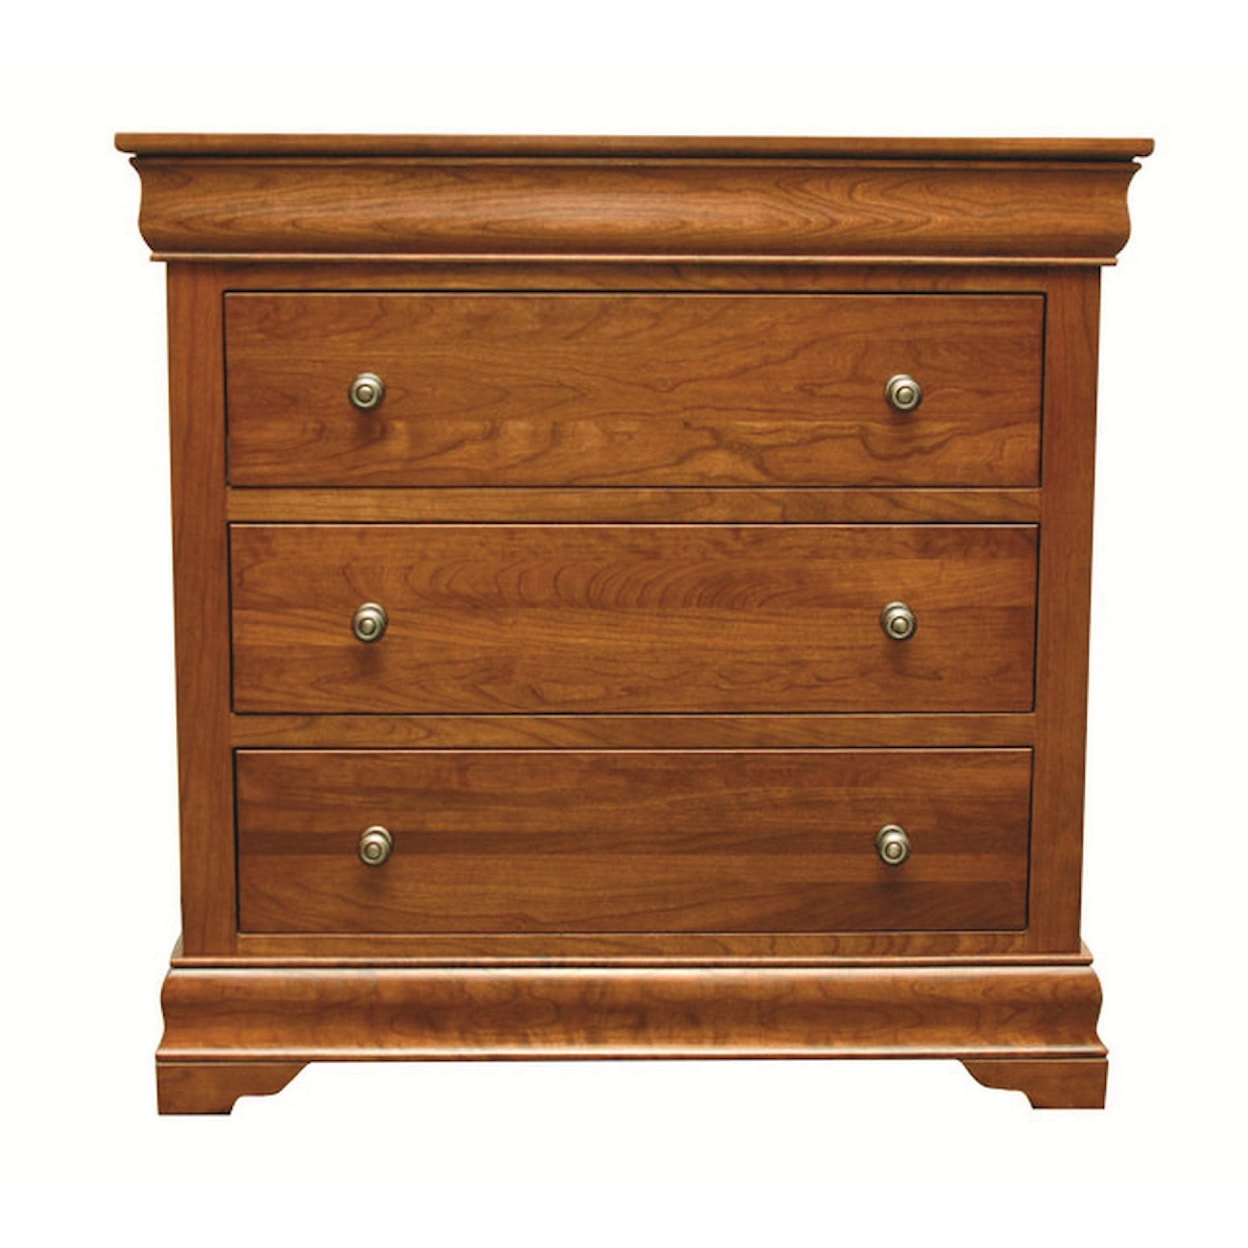 The Urban Collection Bordeaux Bedside Chest